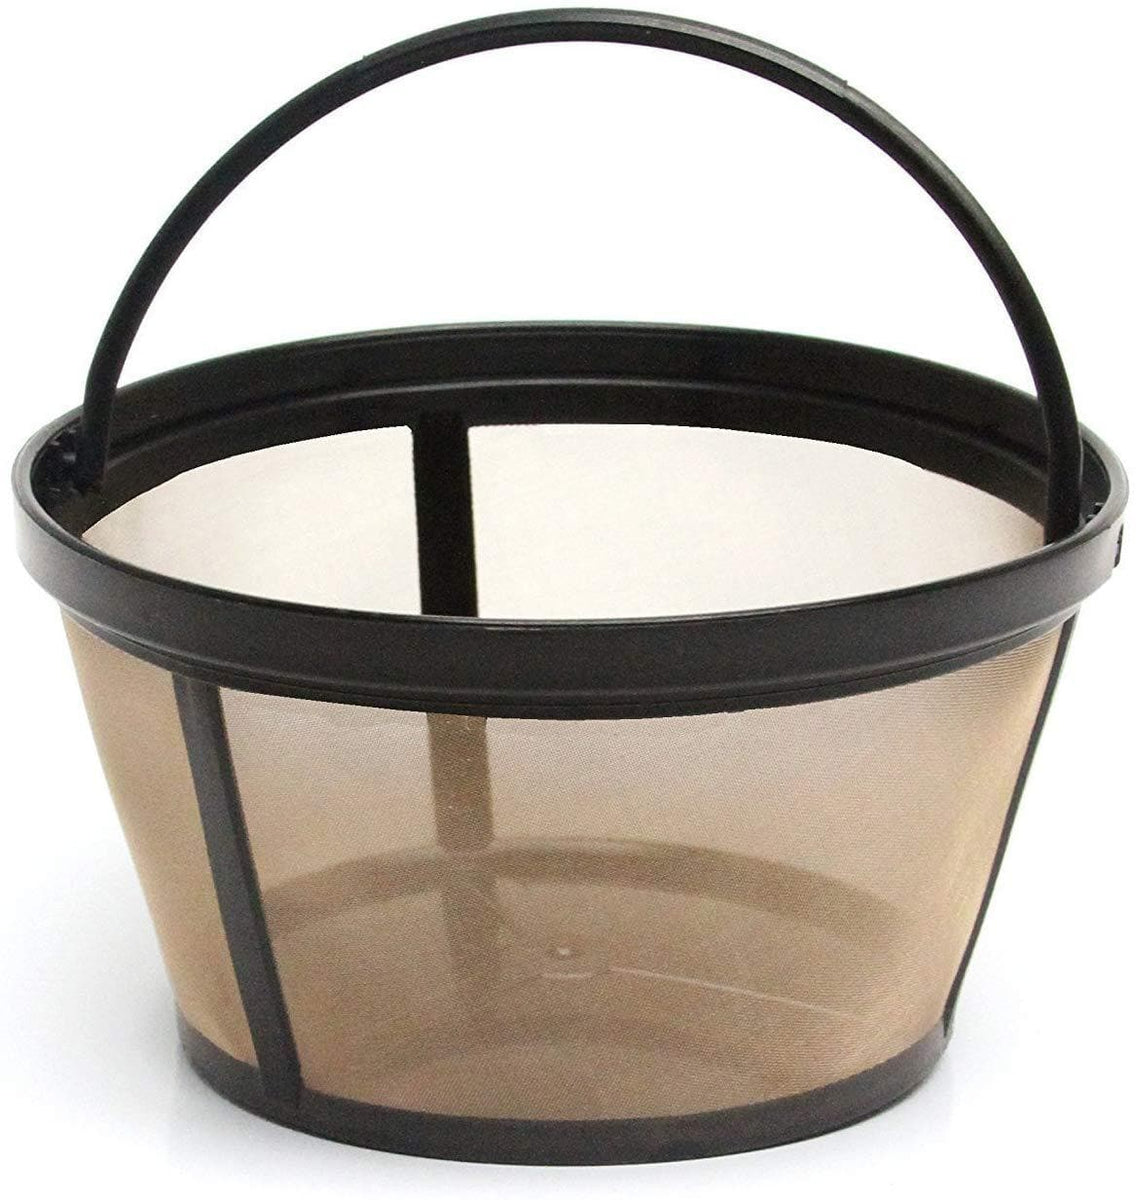 Reusable 8-12 Cup Basket Coffee Filter - Fits Mr. Coffee, Black +